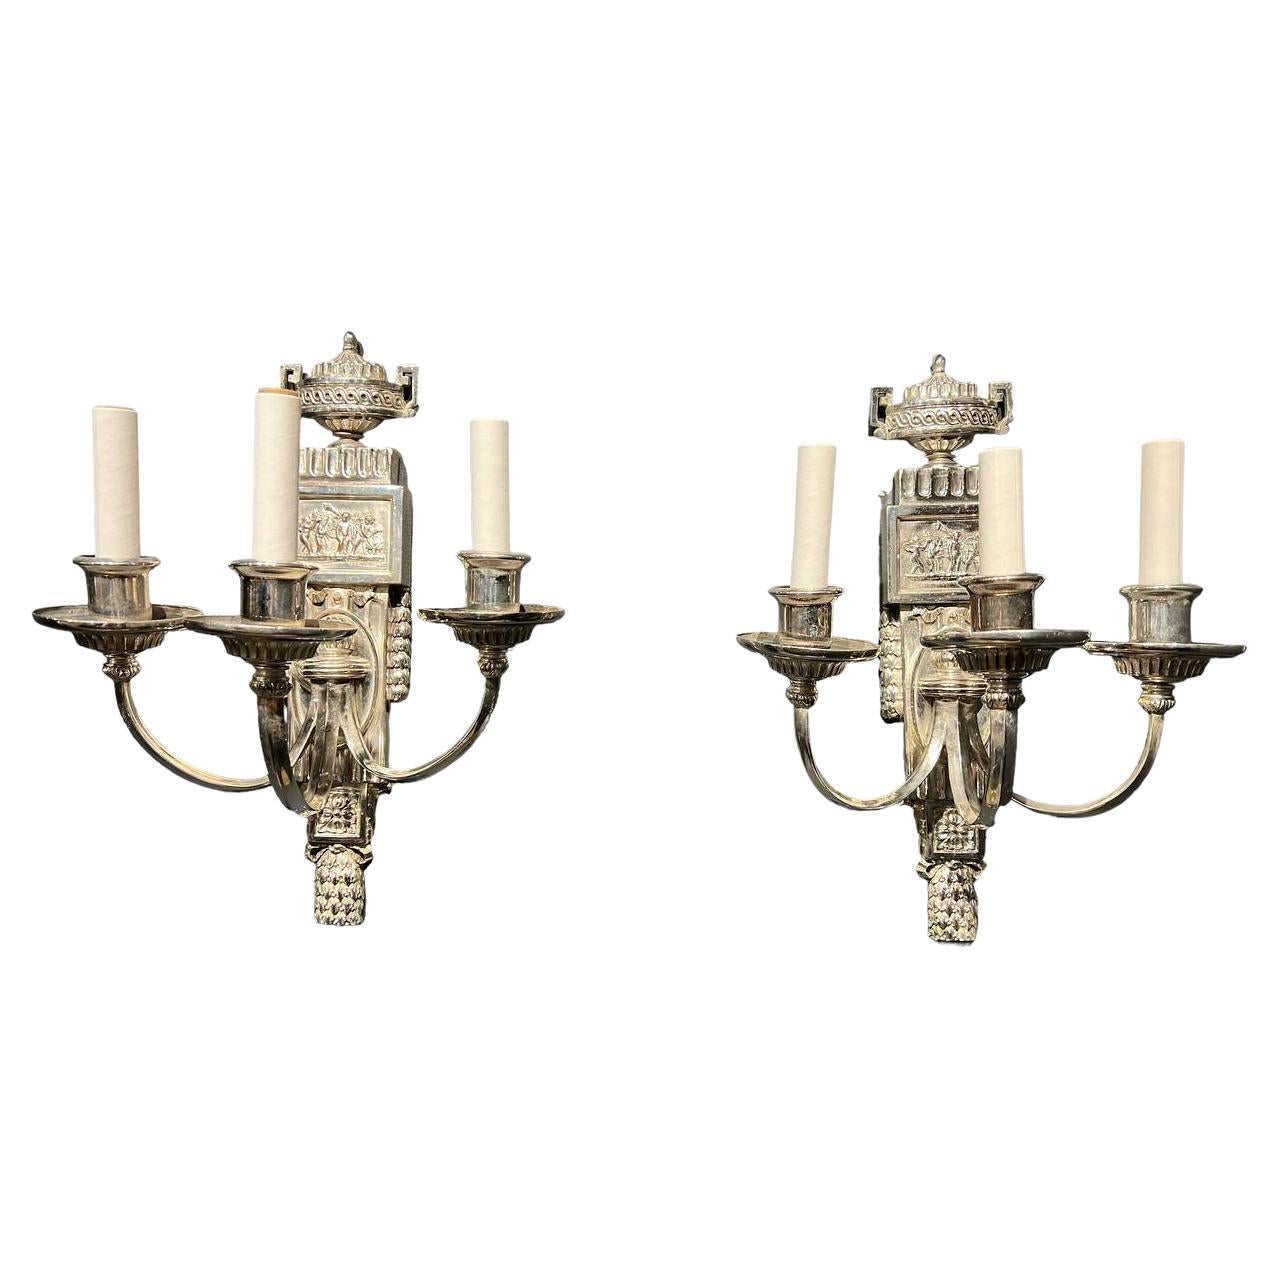 1920's Caldwell Neoclassic Silver Plated Sconces with 3 Lights For Sale